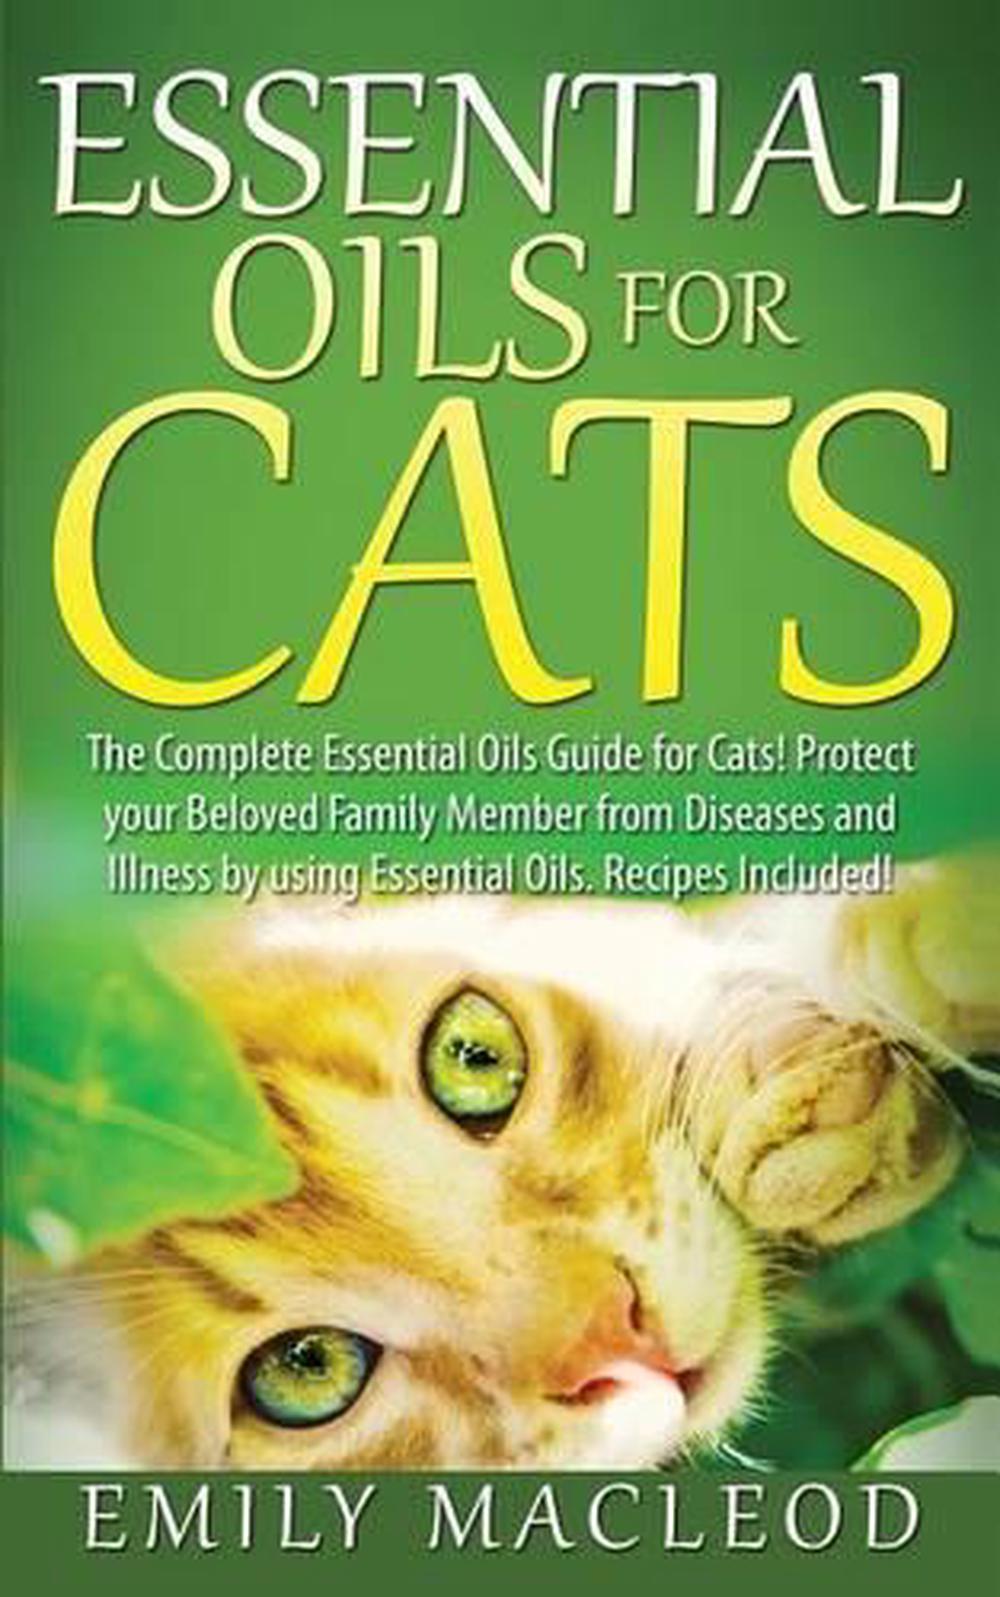 Essential Oils for Cats The Complete Essential Oils Guide for Cats